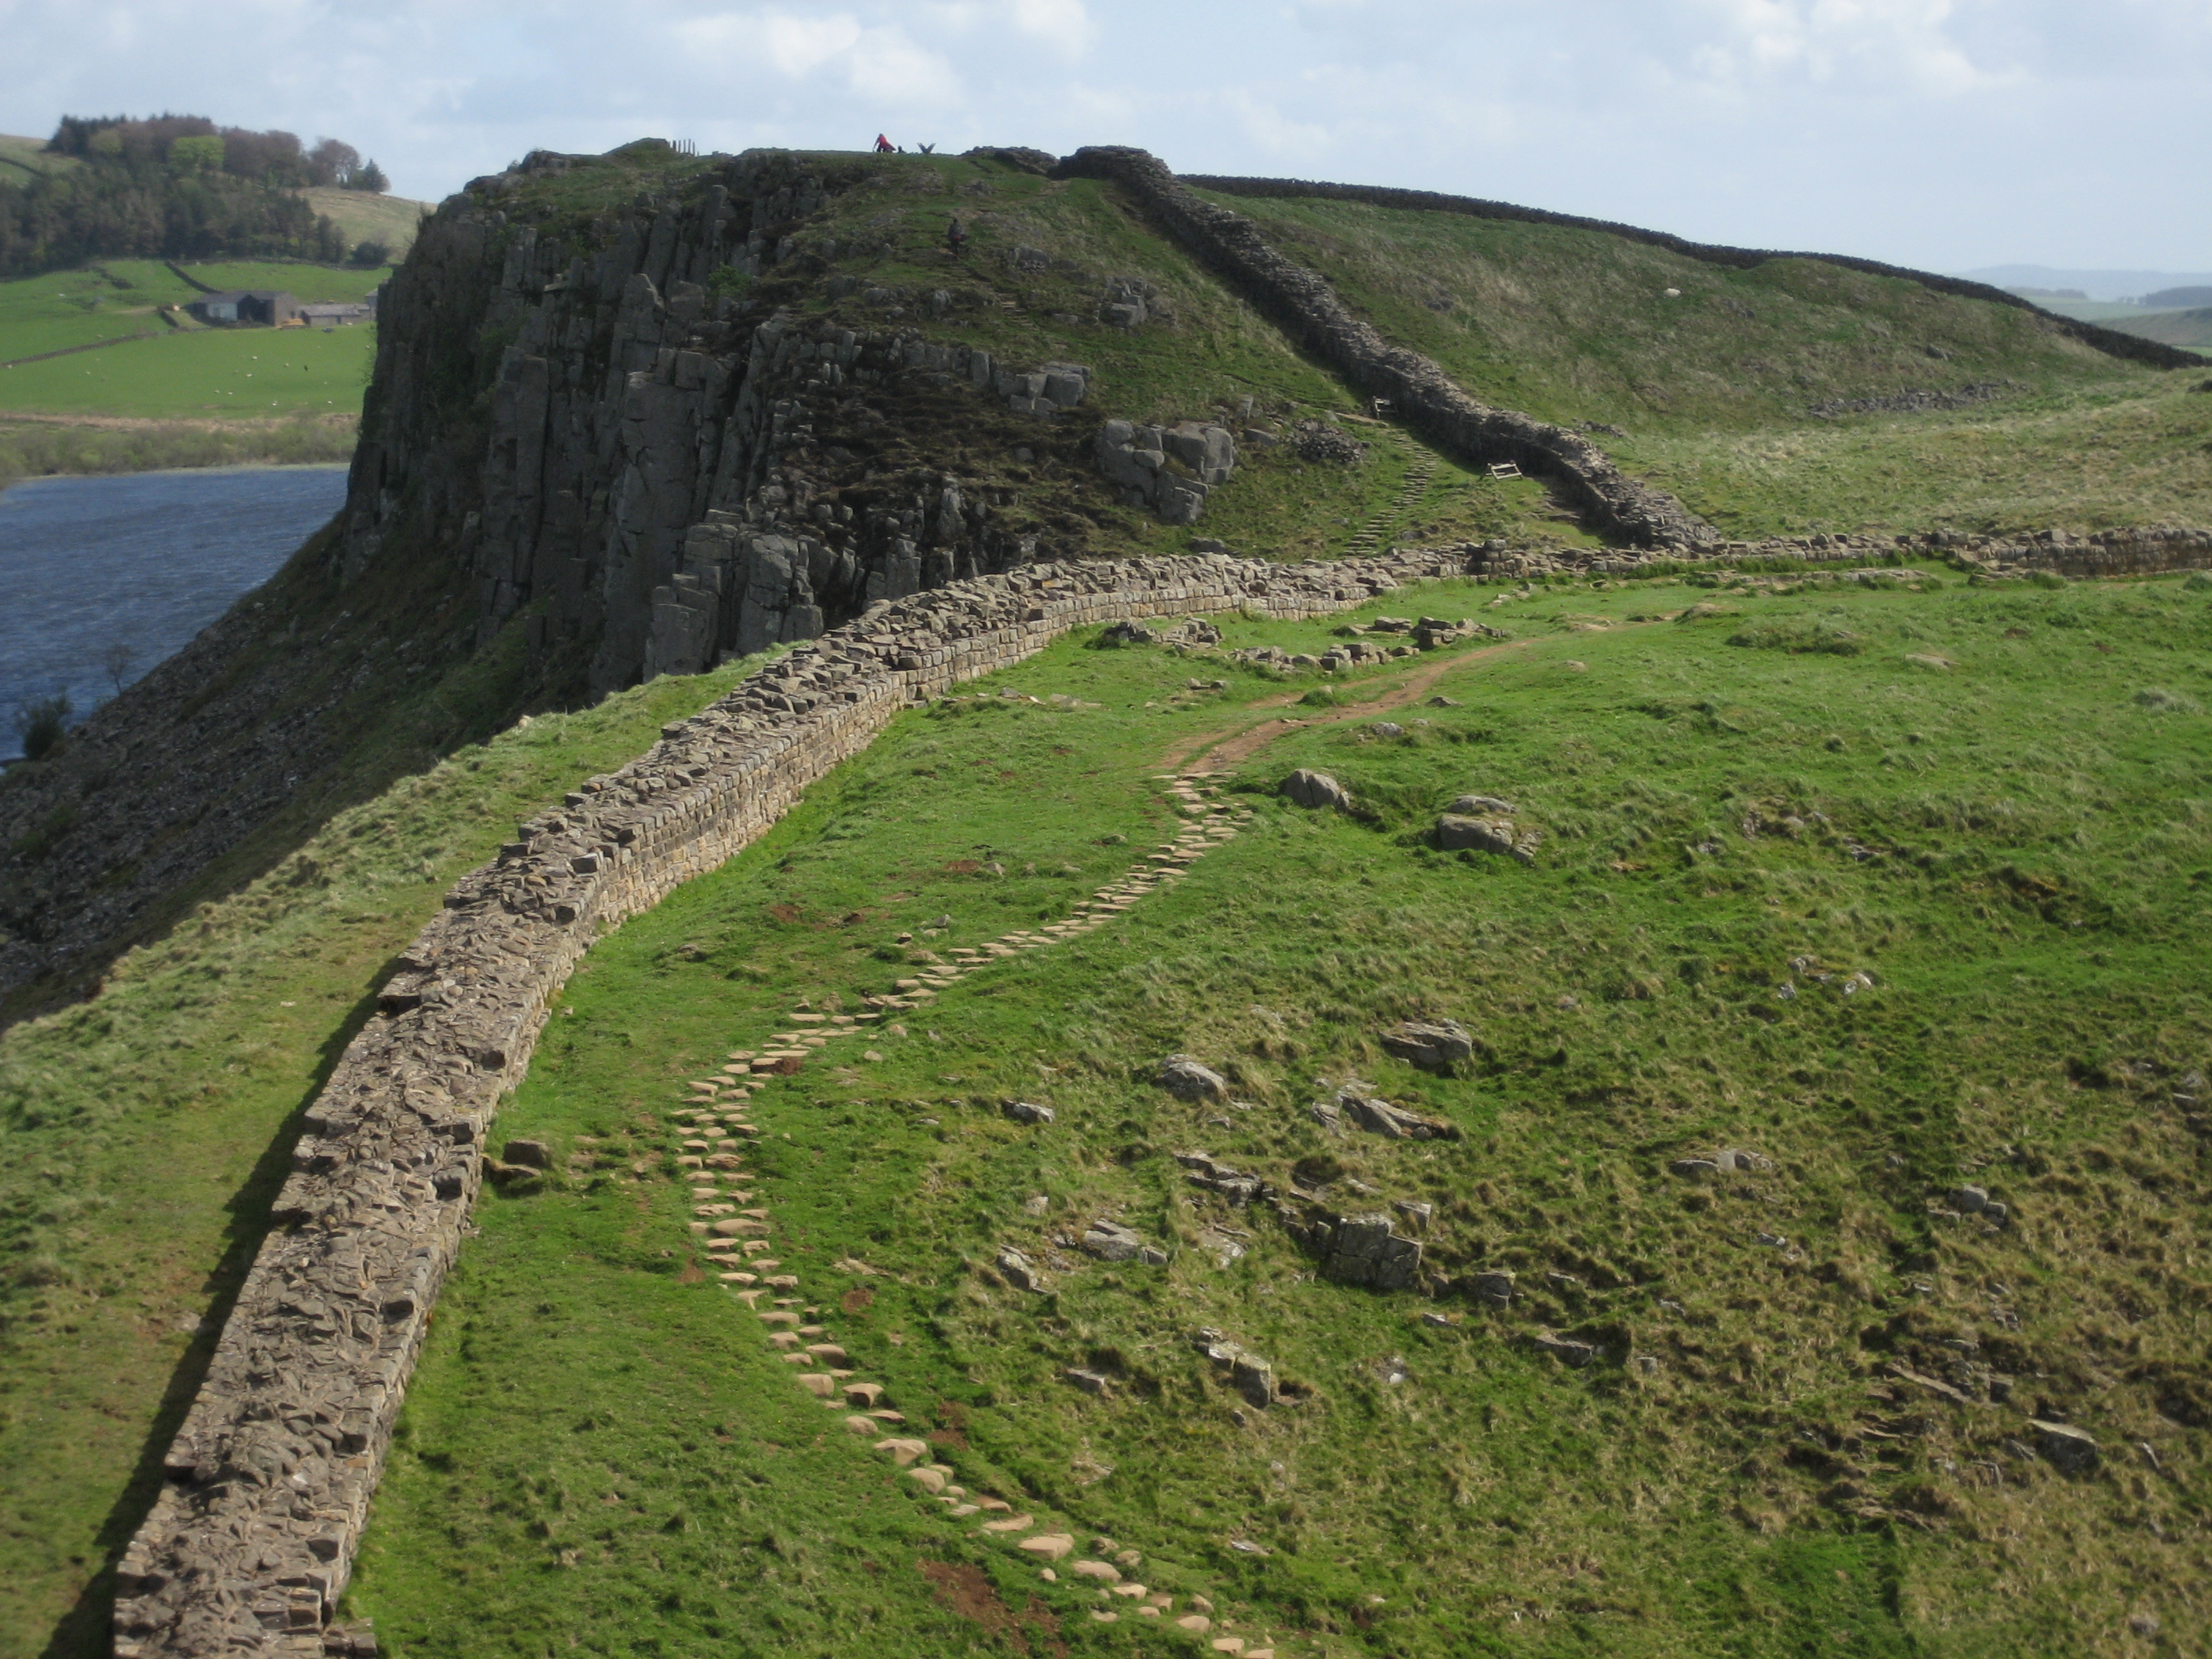 Hadrian's Wall and path, section near Crag Lough. 